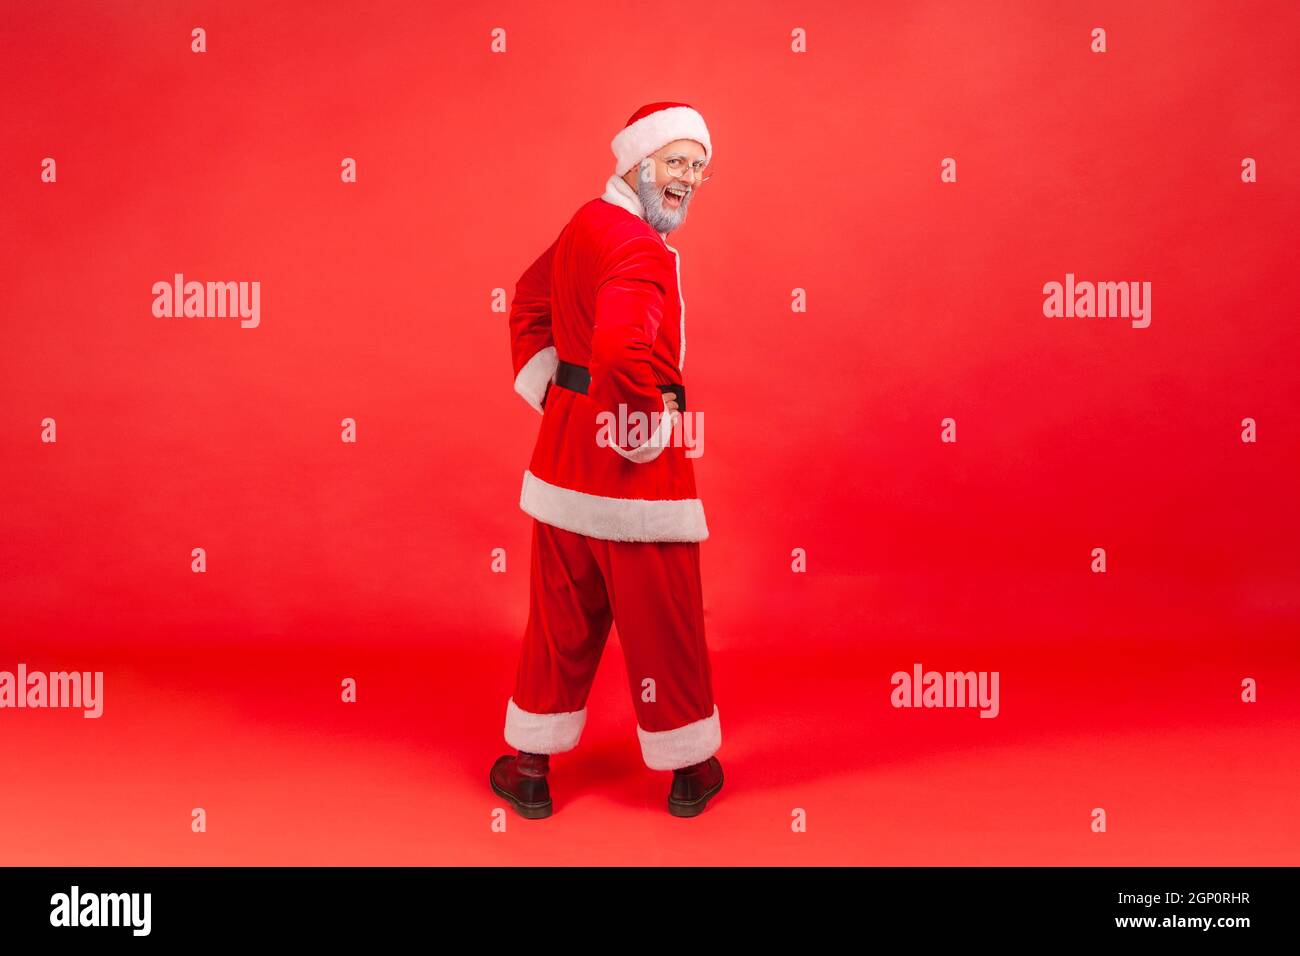 Full length portrait of elderly man with gray beard in santa claus costume standing backwards with hands on hips, turning to camera with excited look. Indoor studio shot isolated on red background. Stock Photo